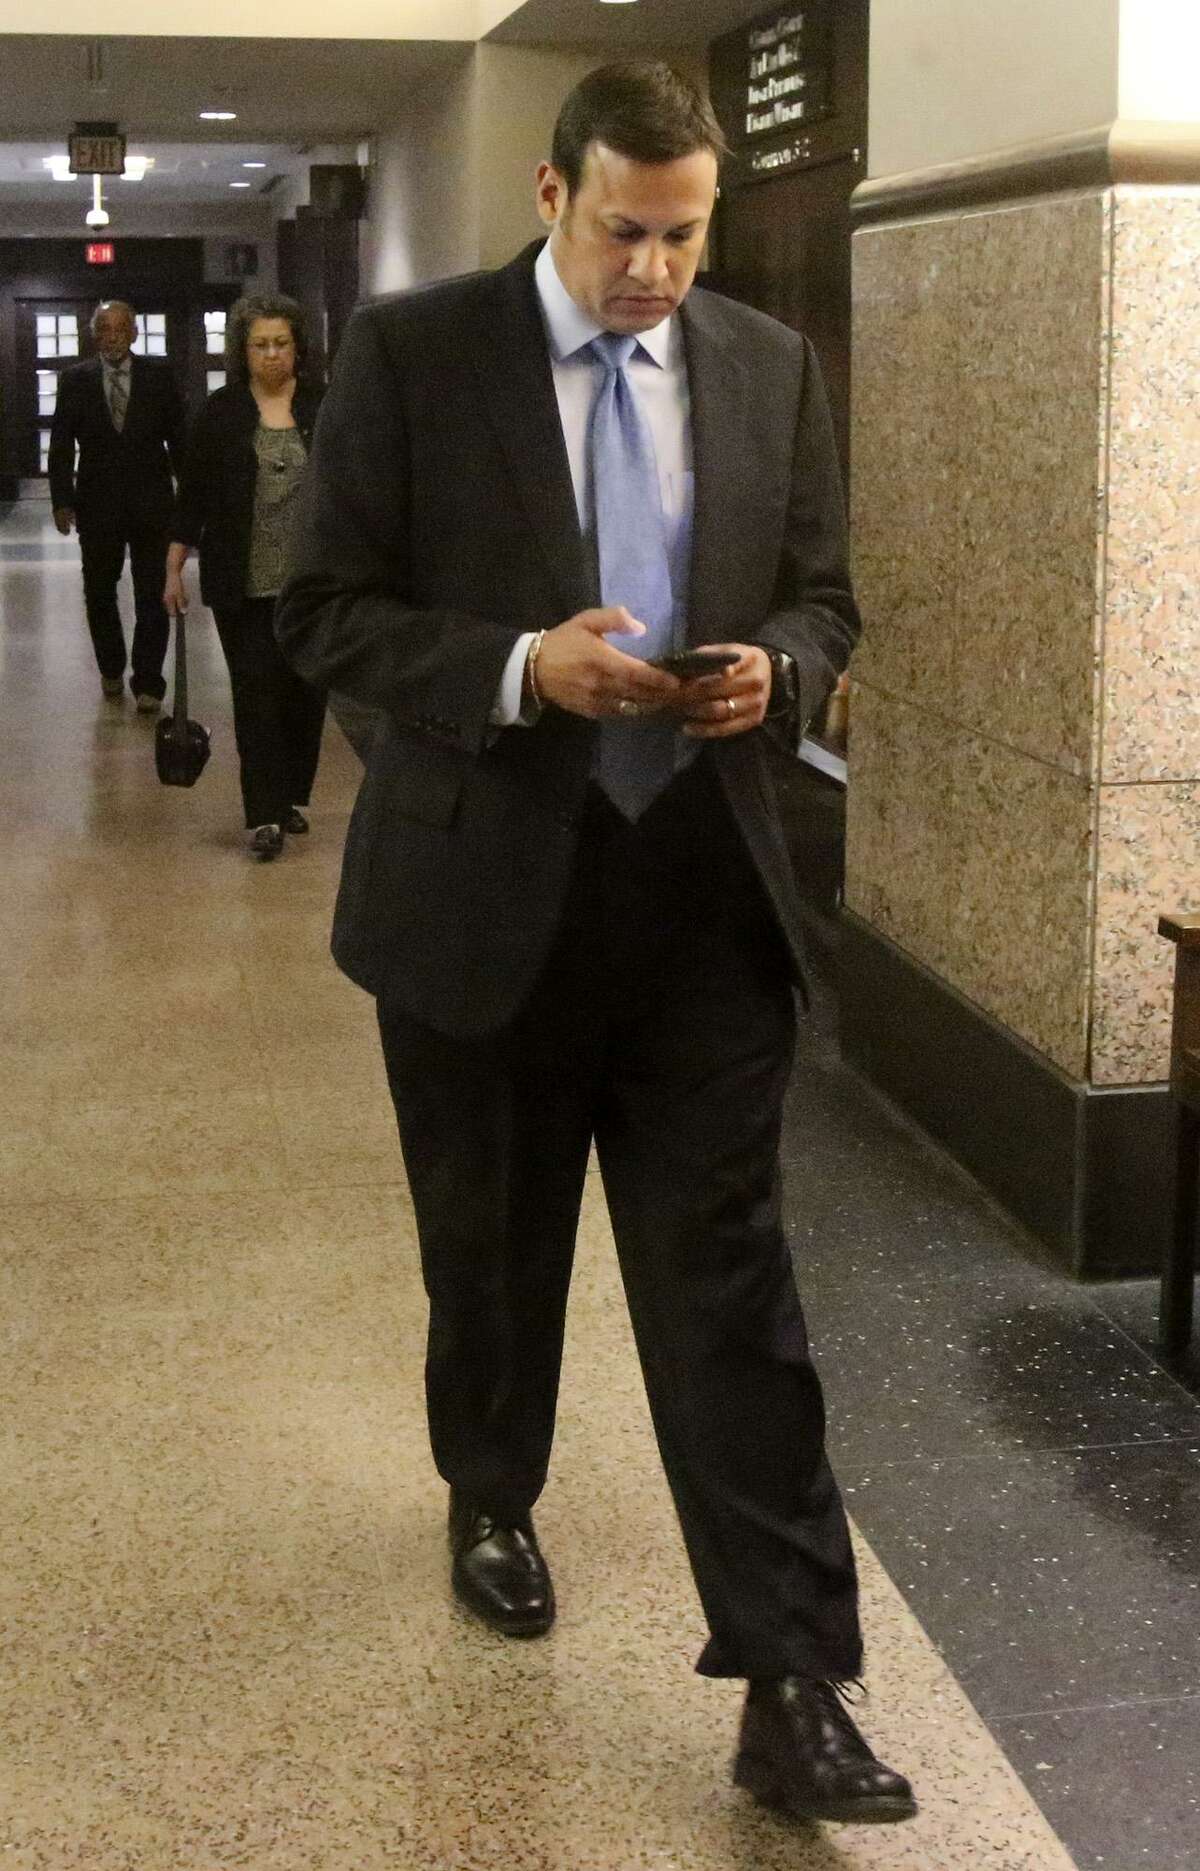 San Antonio attorney Mark Benvides walks to the 186th District Court Thursday March 23, 2017. The San Antonio attorney is accused of coercing clients into having sex with him in exchange for money or legal services and videotaping the encounters.